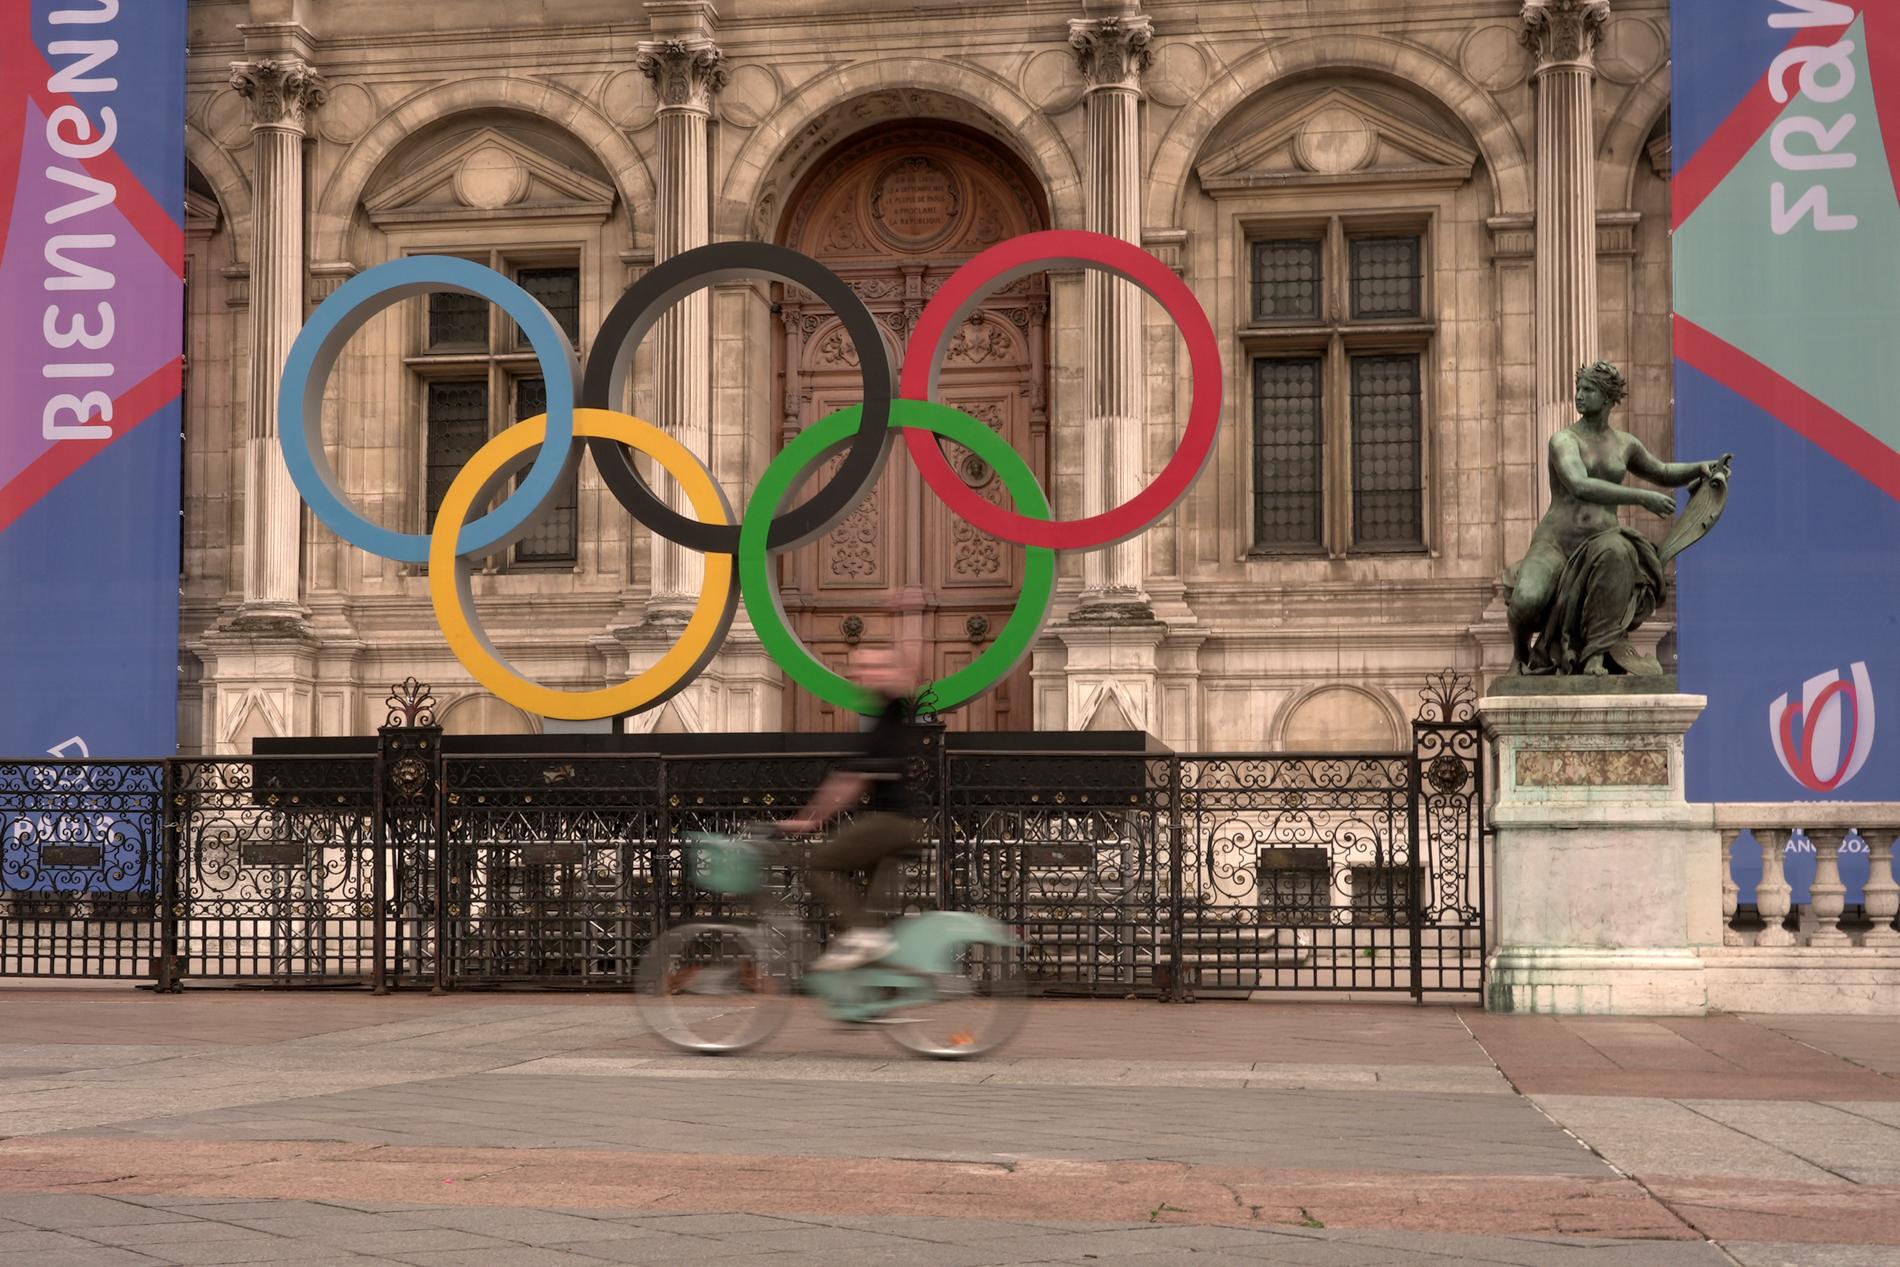 The Olympic Games in Paris are in the preparation stage. 